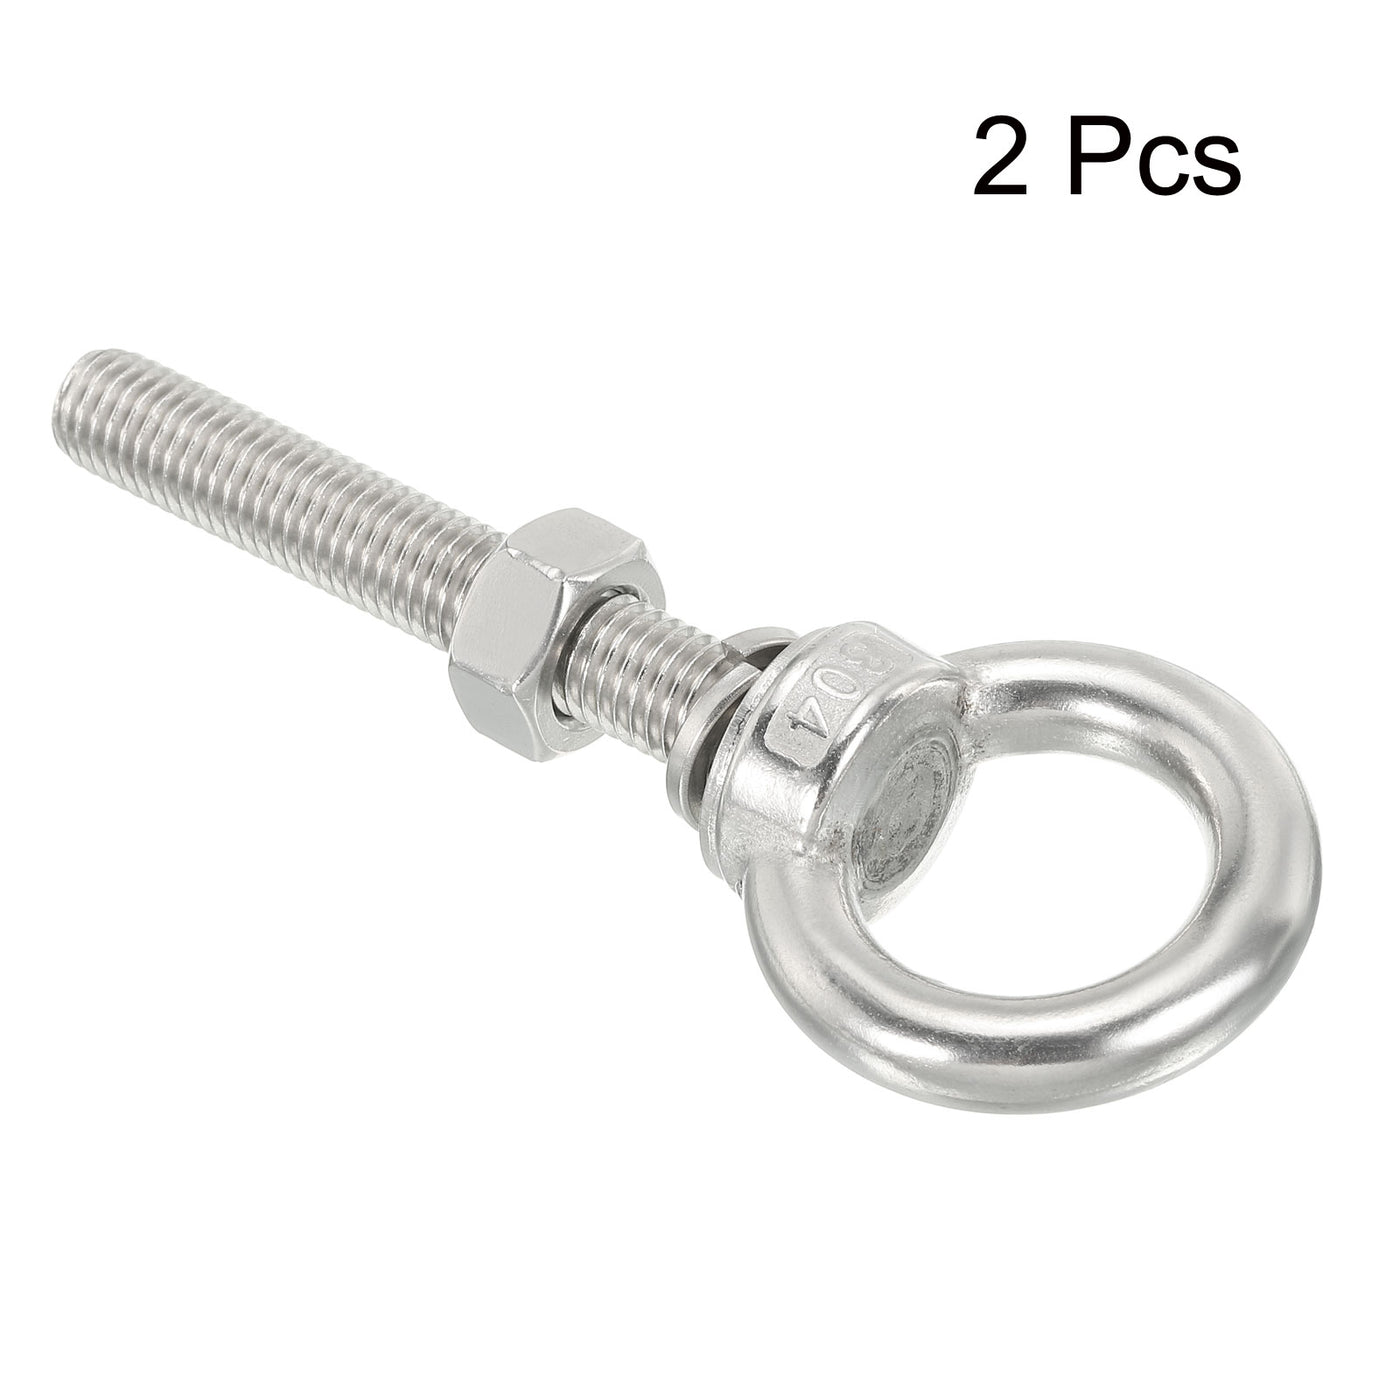 uxcell Uxcell M12x80 1/2"x3.15" Stainless Steel Eye Bolts Threaded Screw Eyebolt Shoulder Ring with Nuts Washers for Lifting Hanging, 2 Set